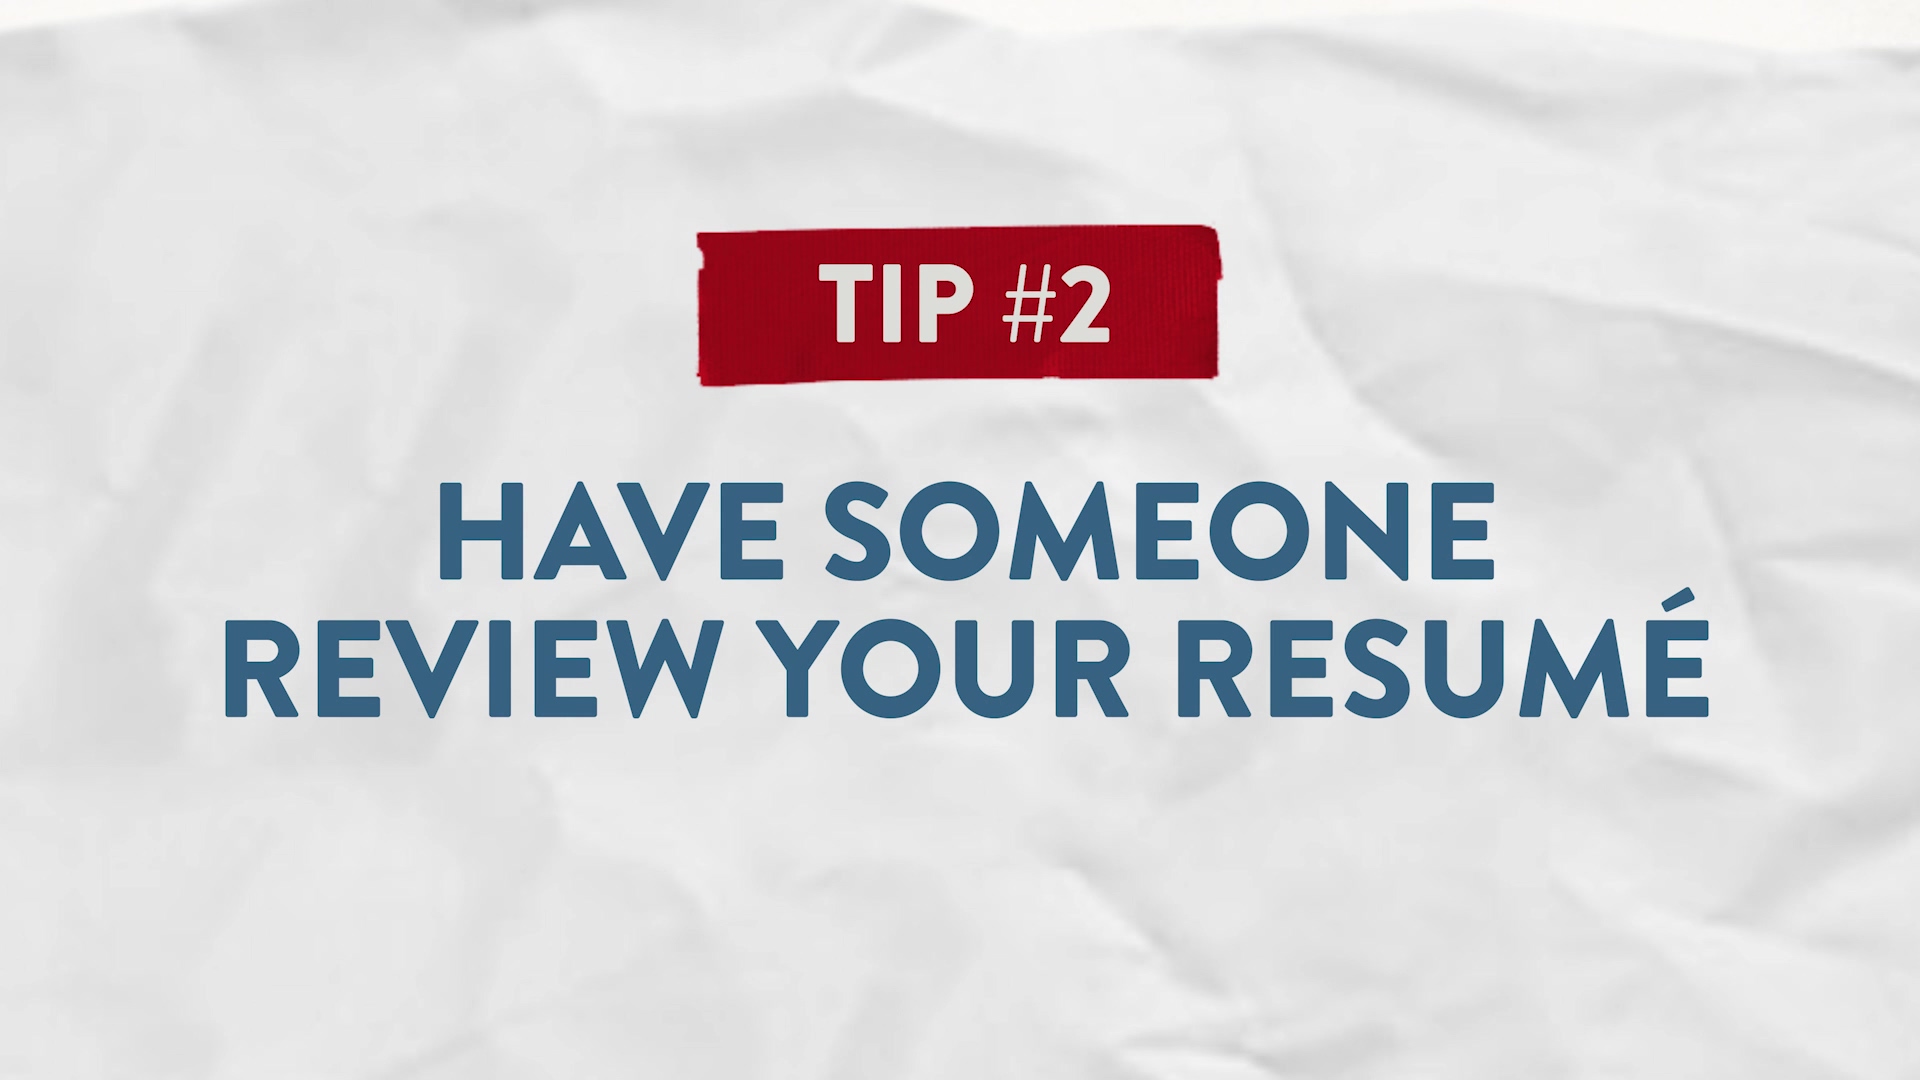 Tip #2 Have Someone Review Your Resume